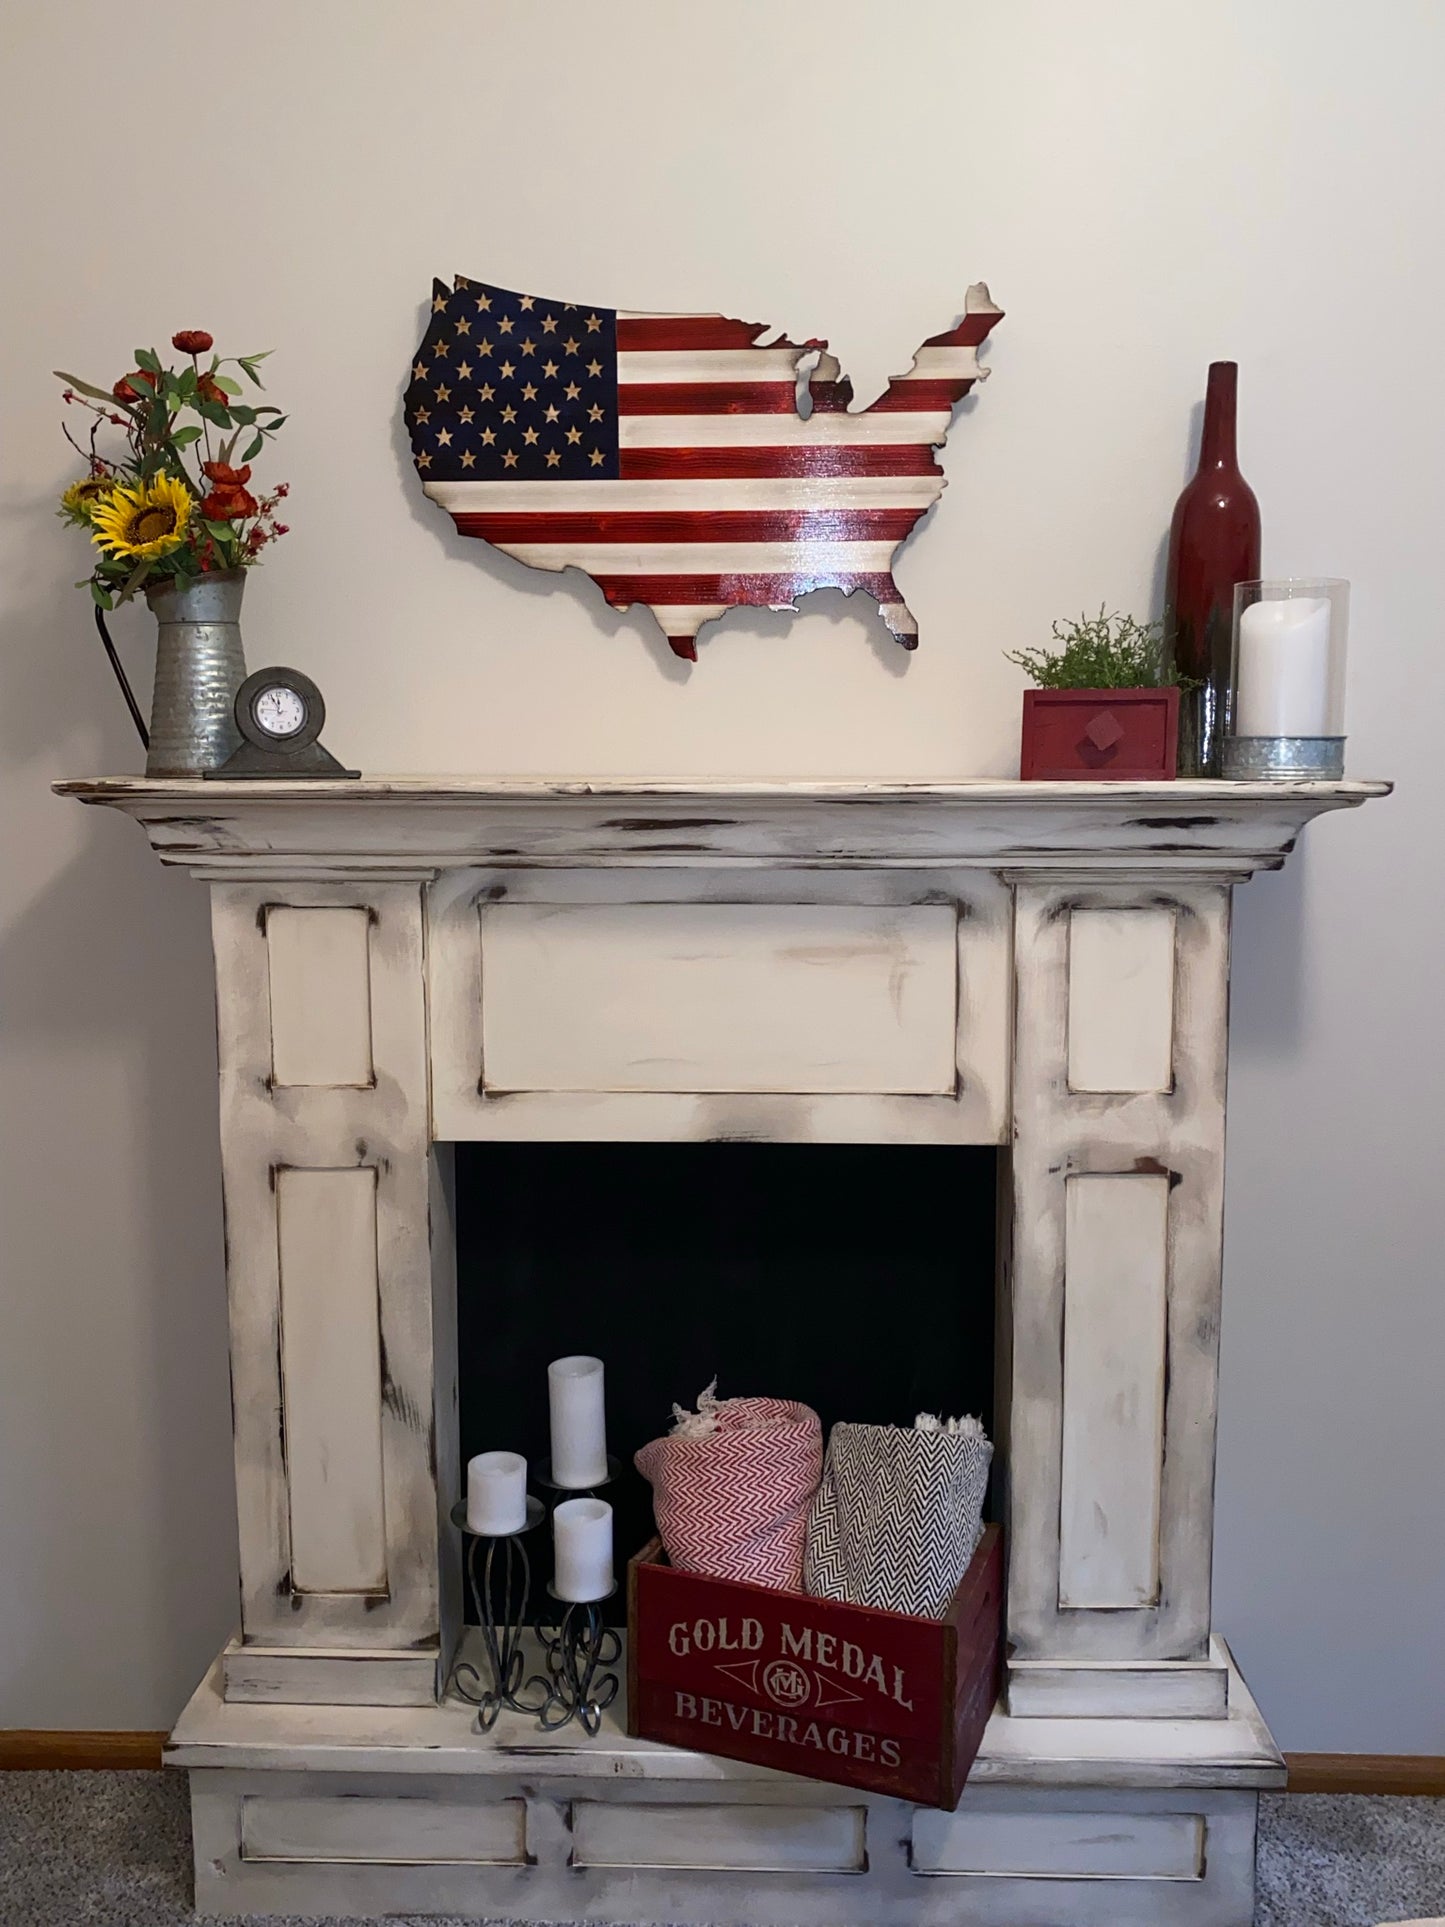 The Original Red, White and Blue Wooden Continental Rustic USA flag